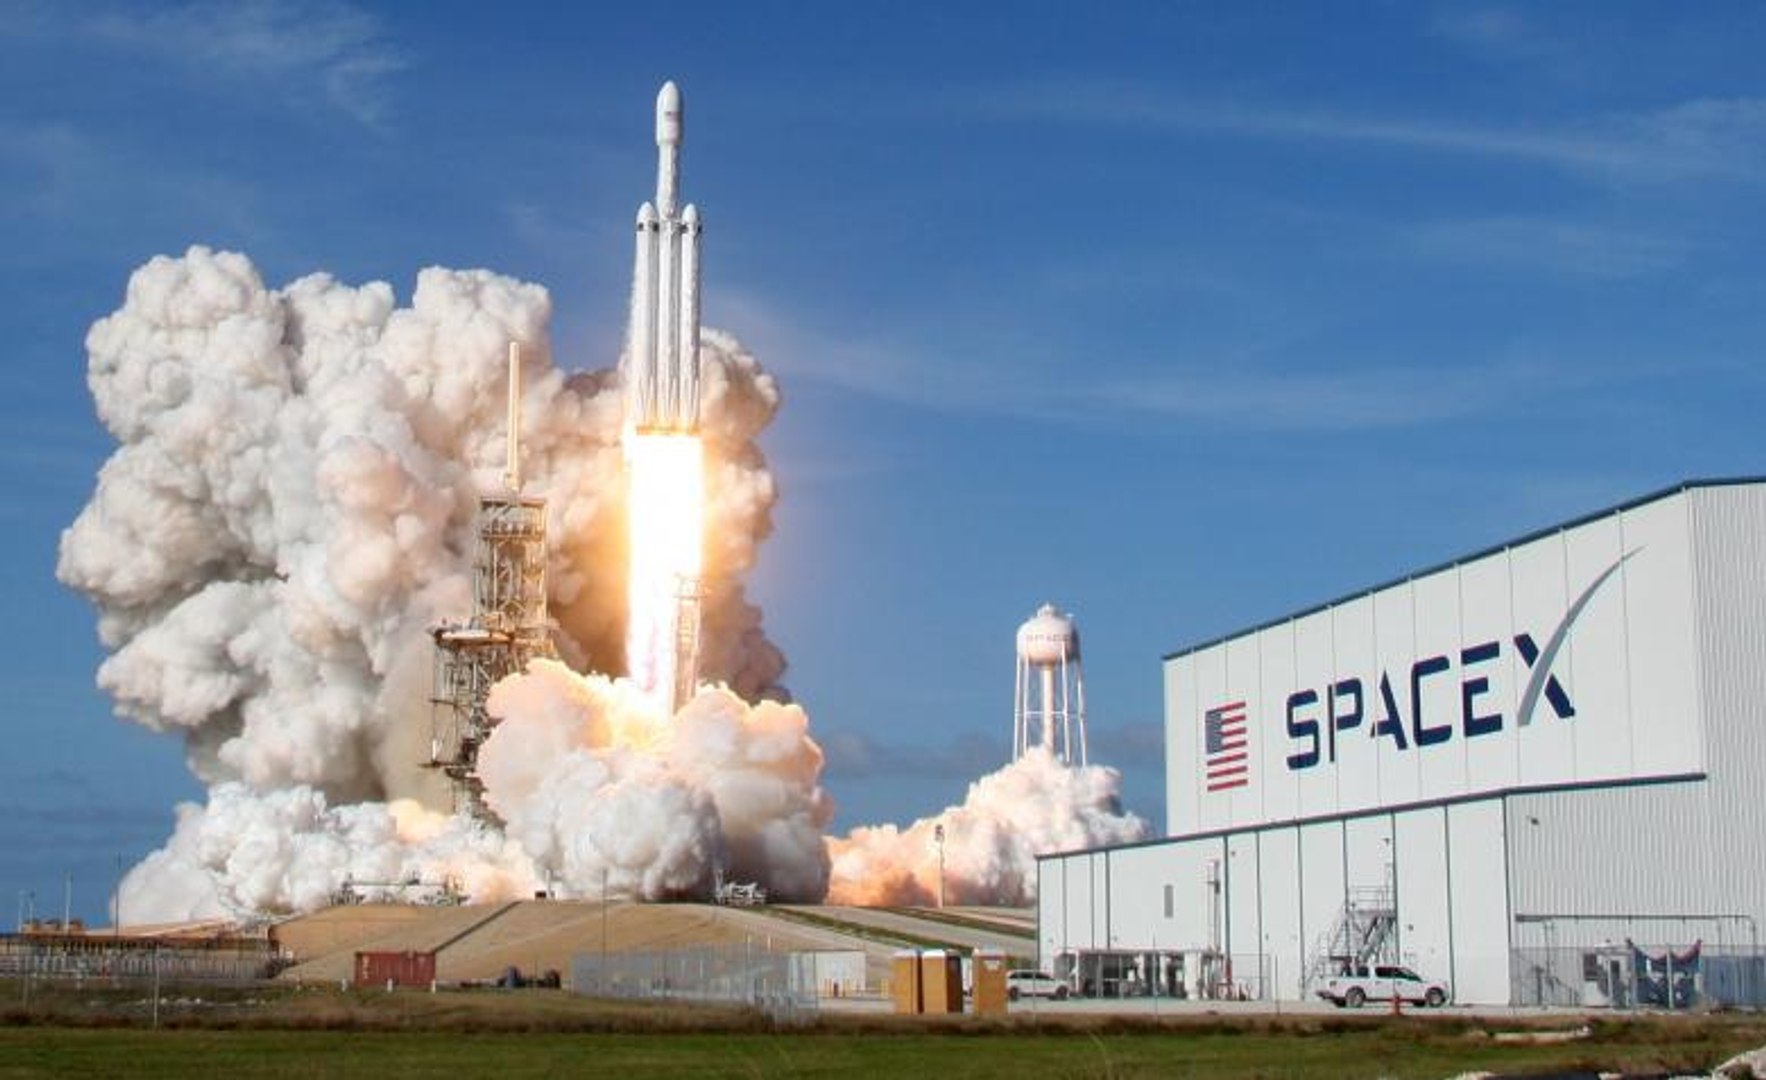 SpaceX has announced the launch of their Falcon Heavy, a powerful new rocket that will make it possi